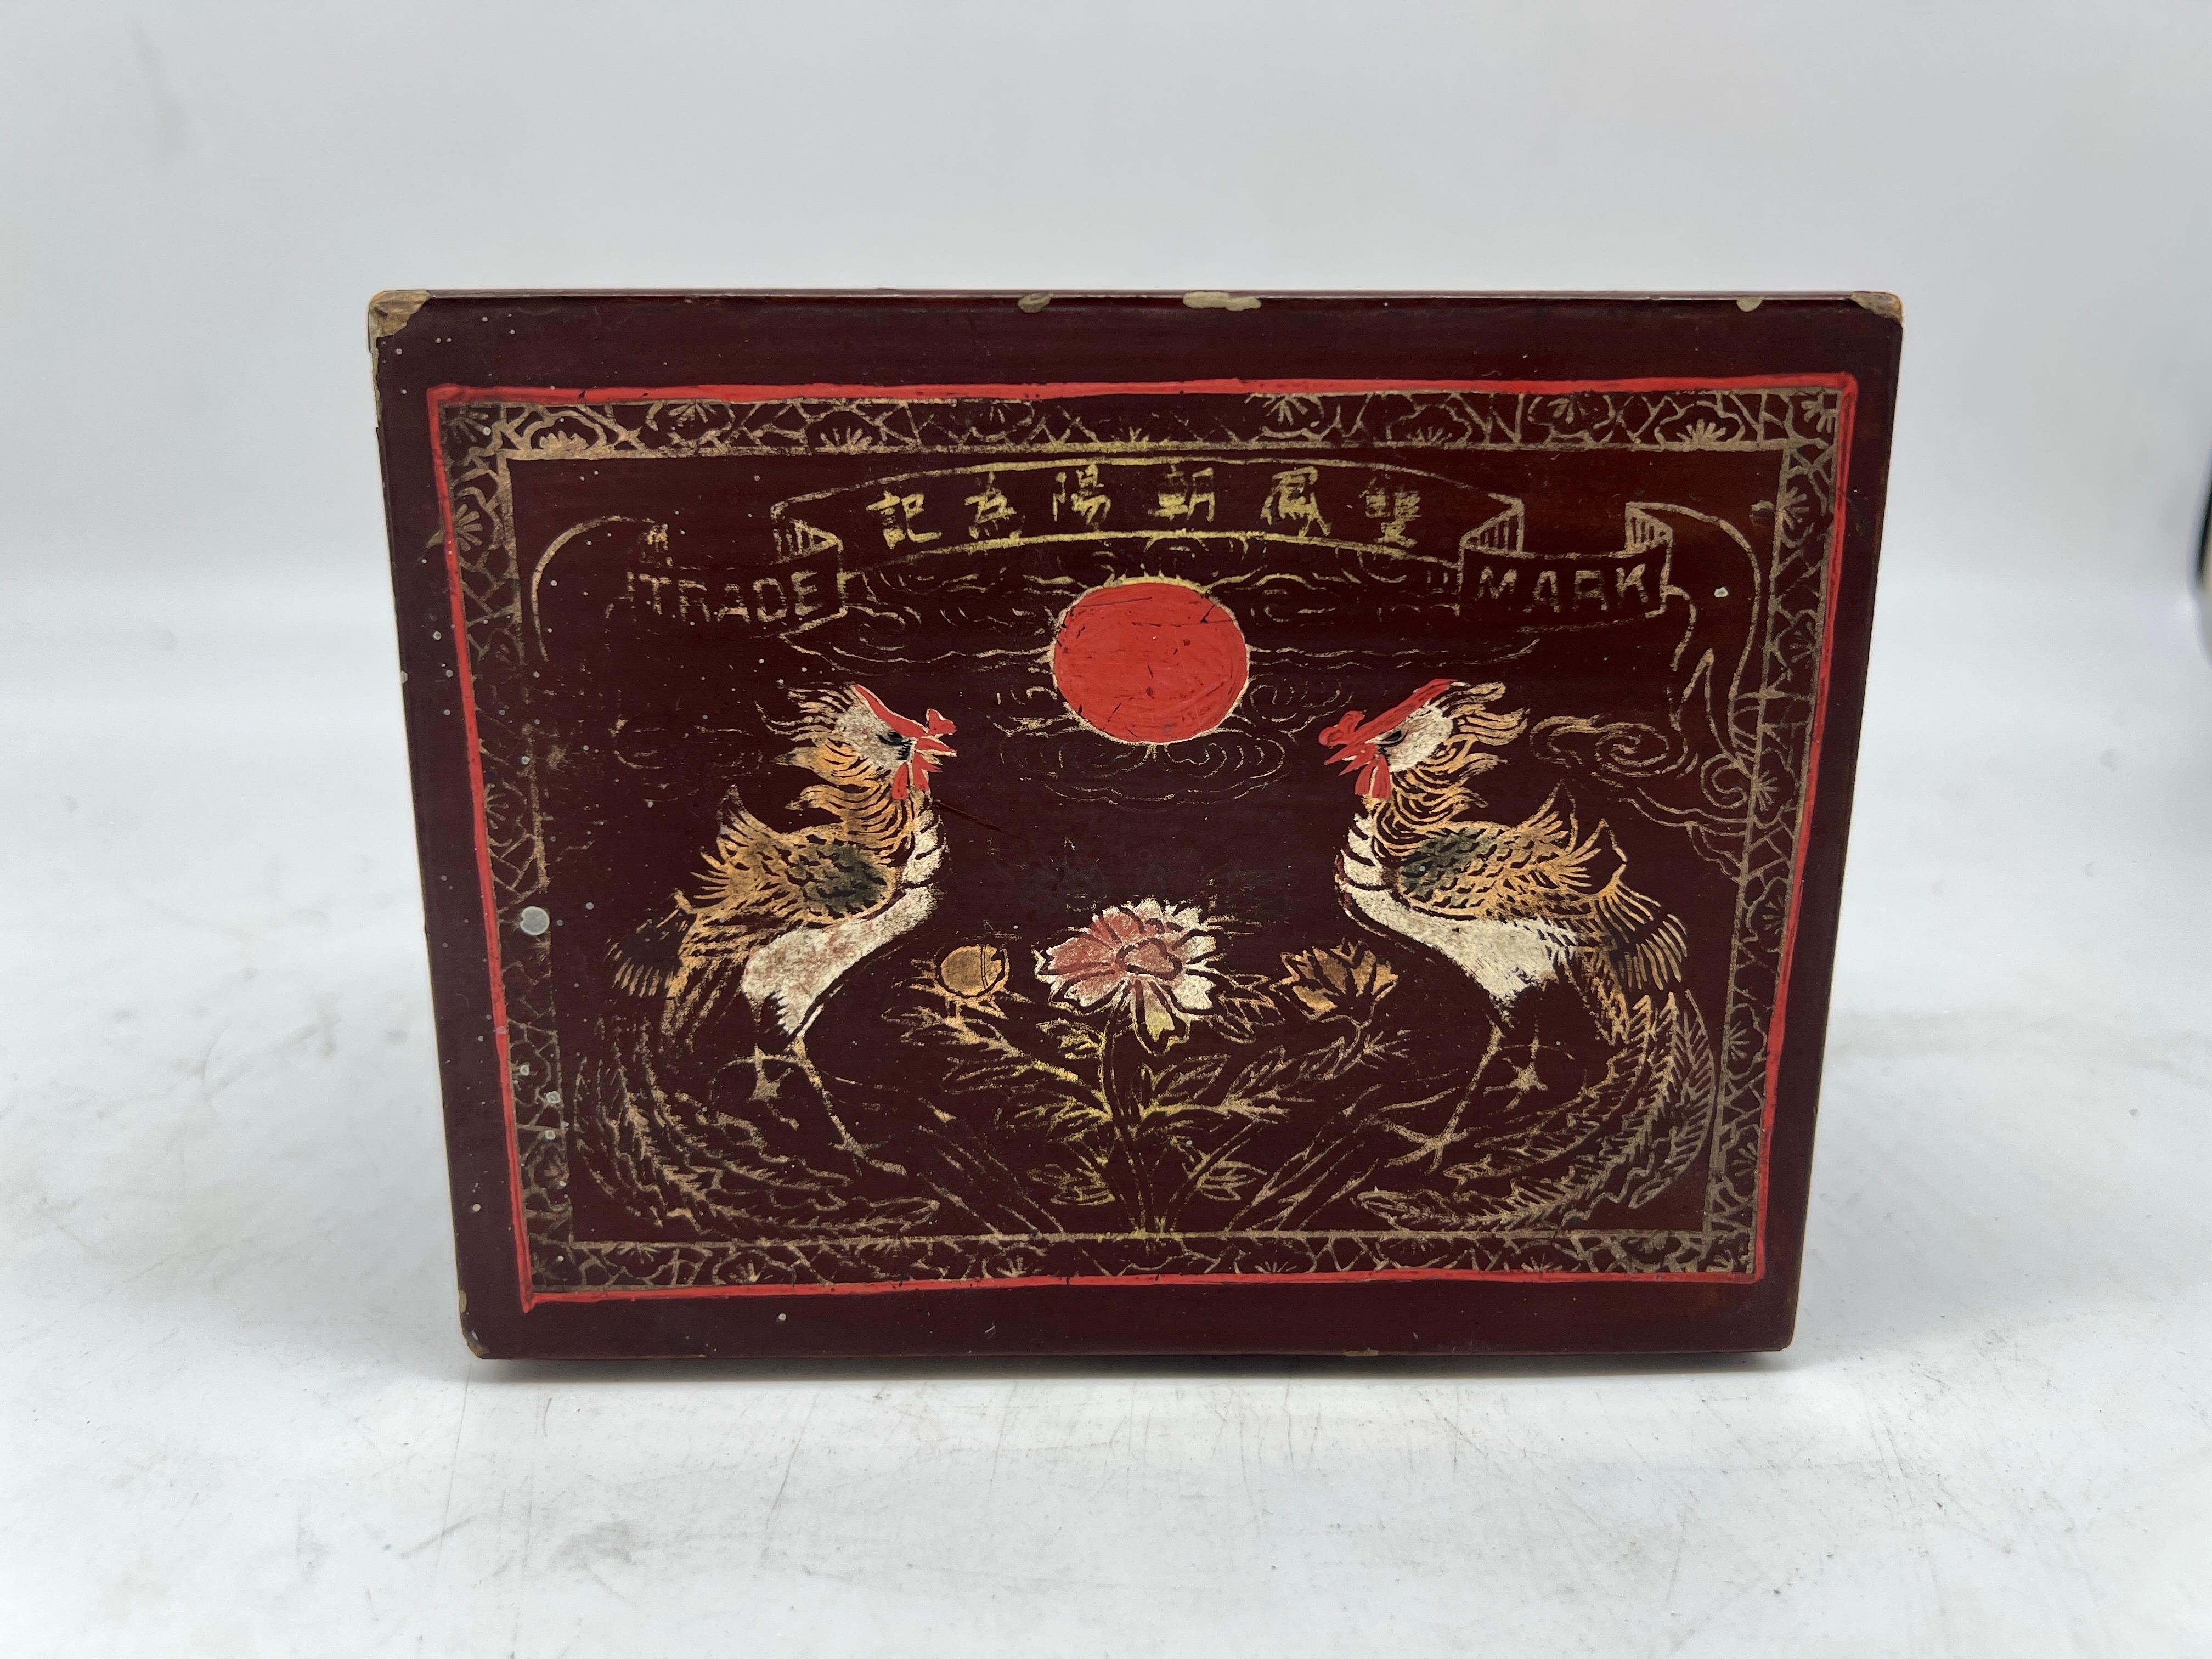 Chinese, early 20th century. 

An antique red lacquer box with gilt decorated chickens, Chinese lettering and other symbols. Marked to box with maker.